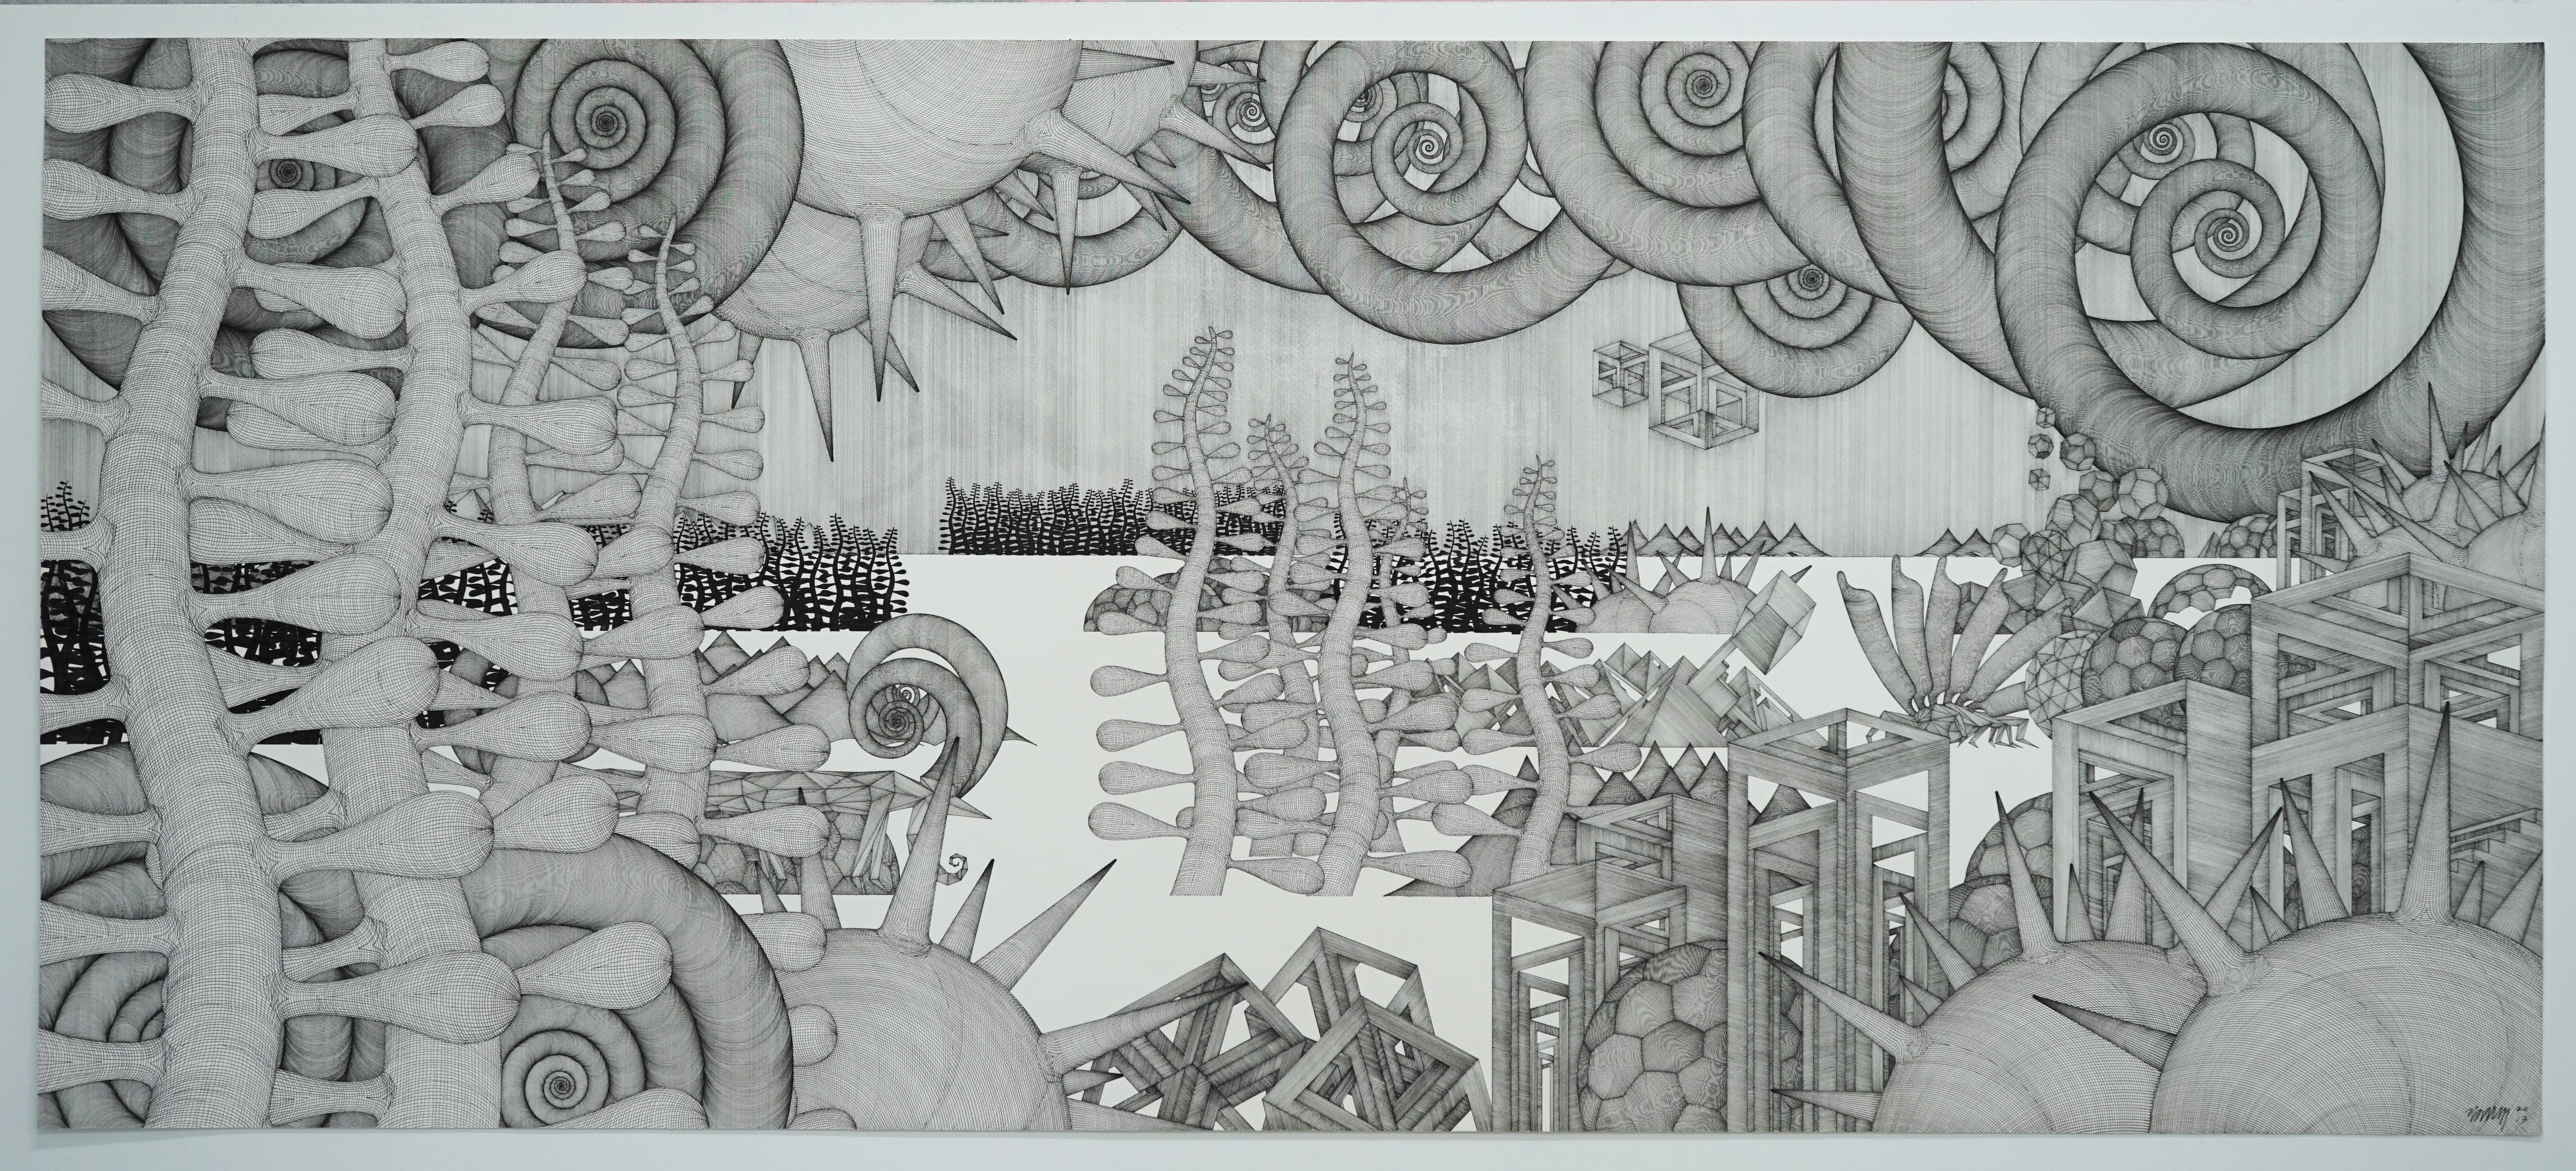 Cheolyu Kim Abstract Drawing - Journey to nowhere #25